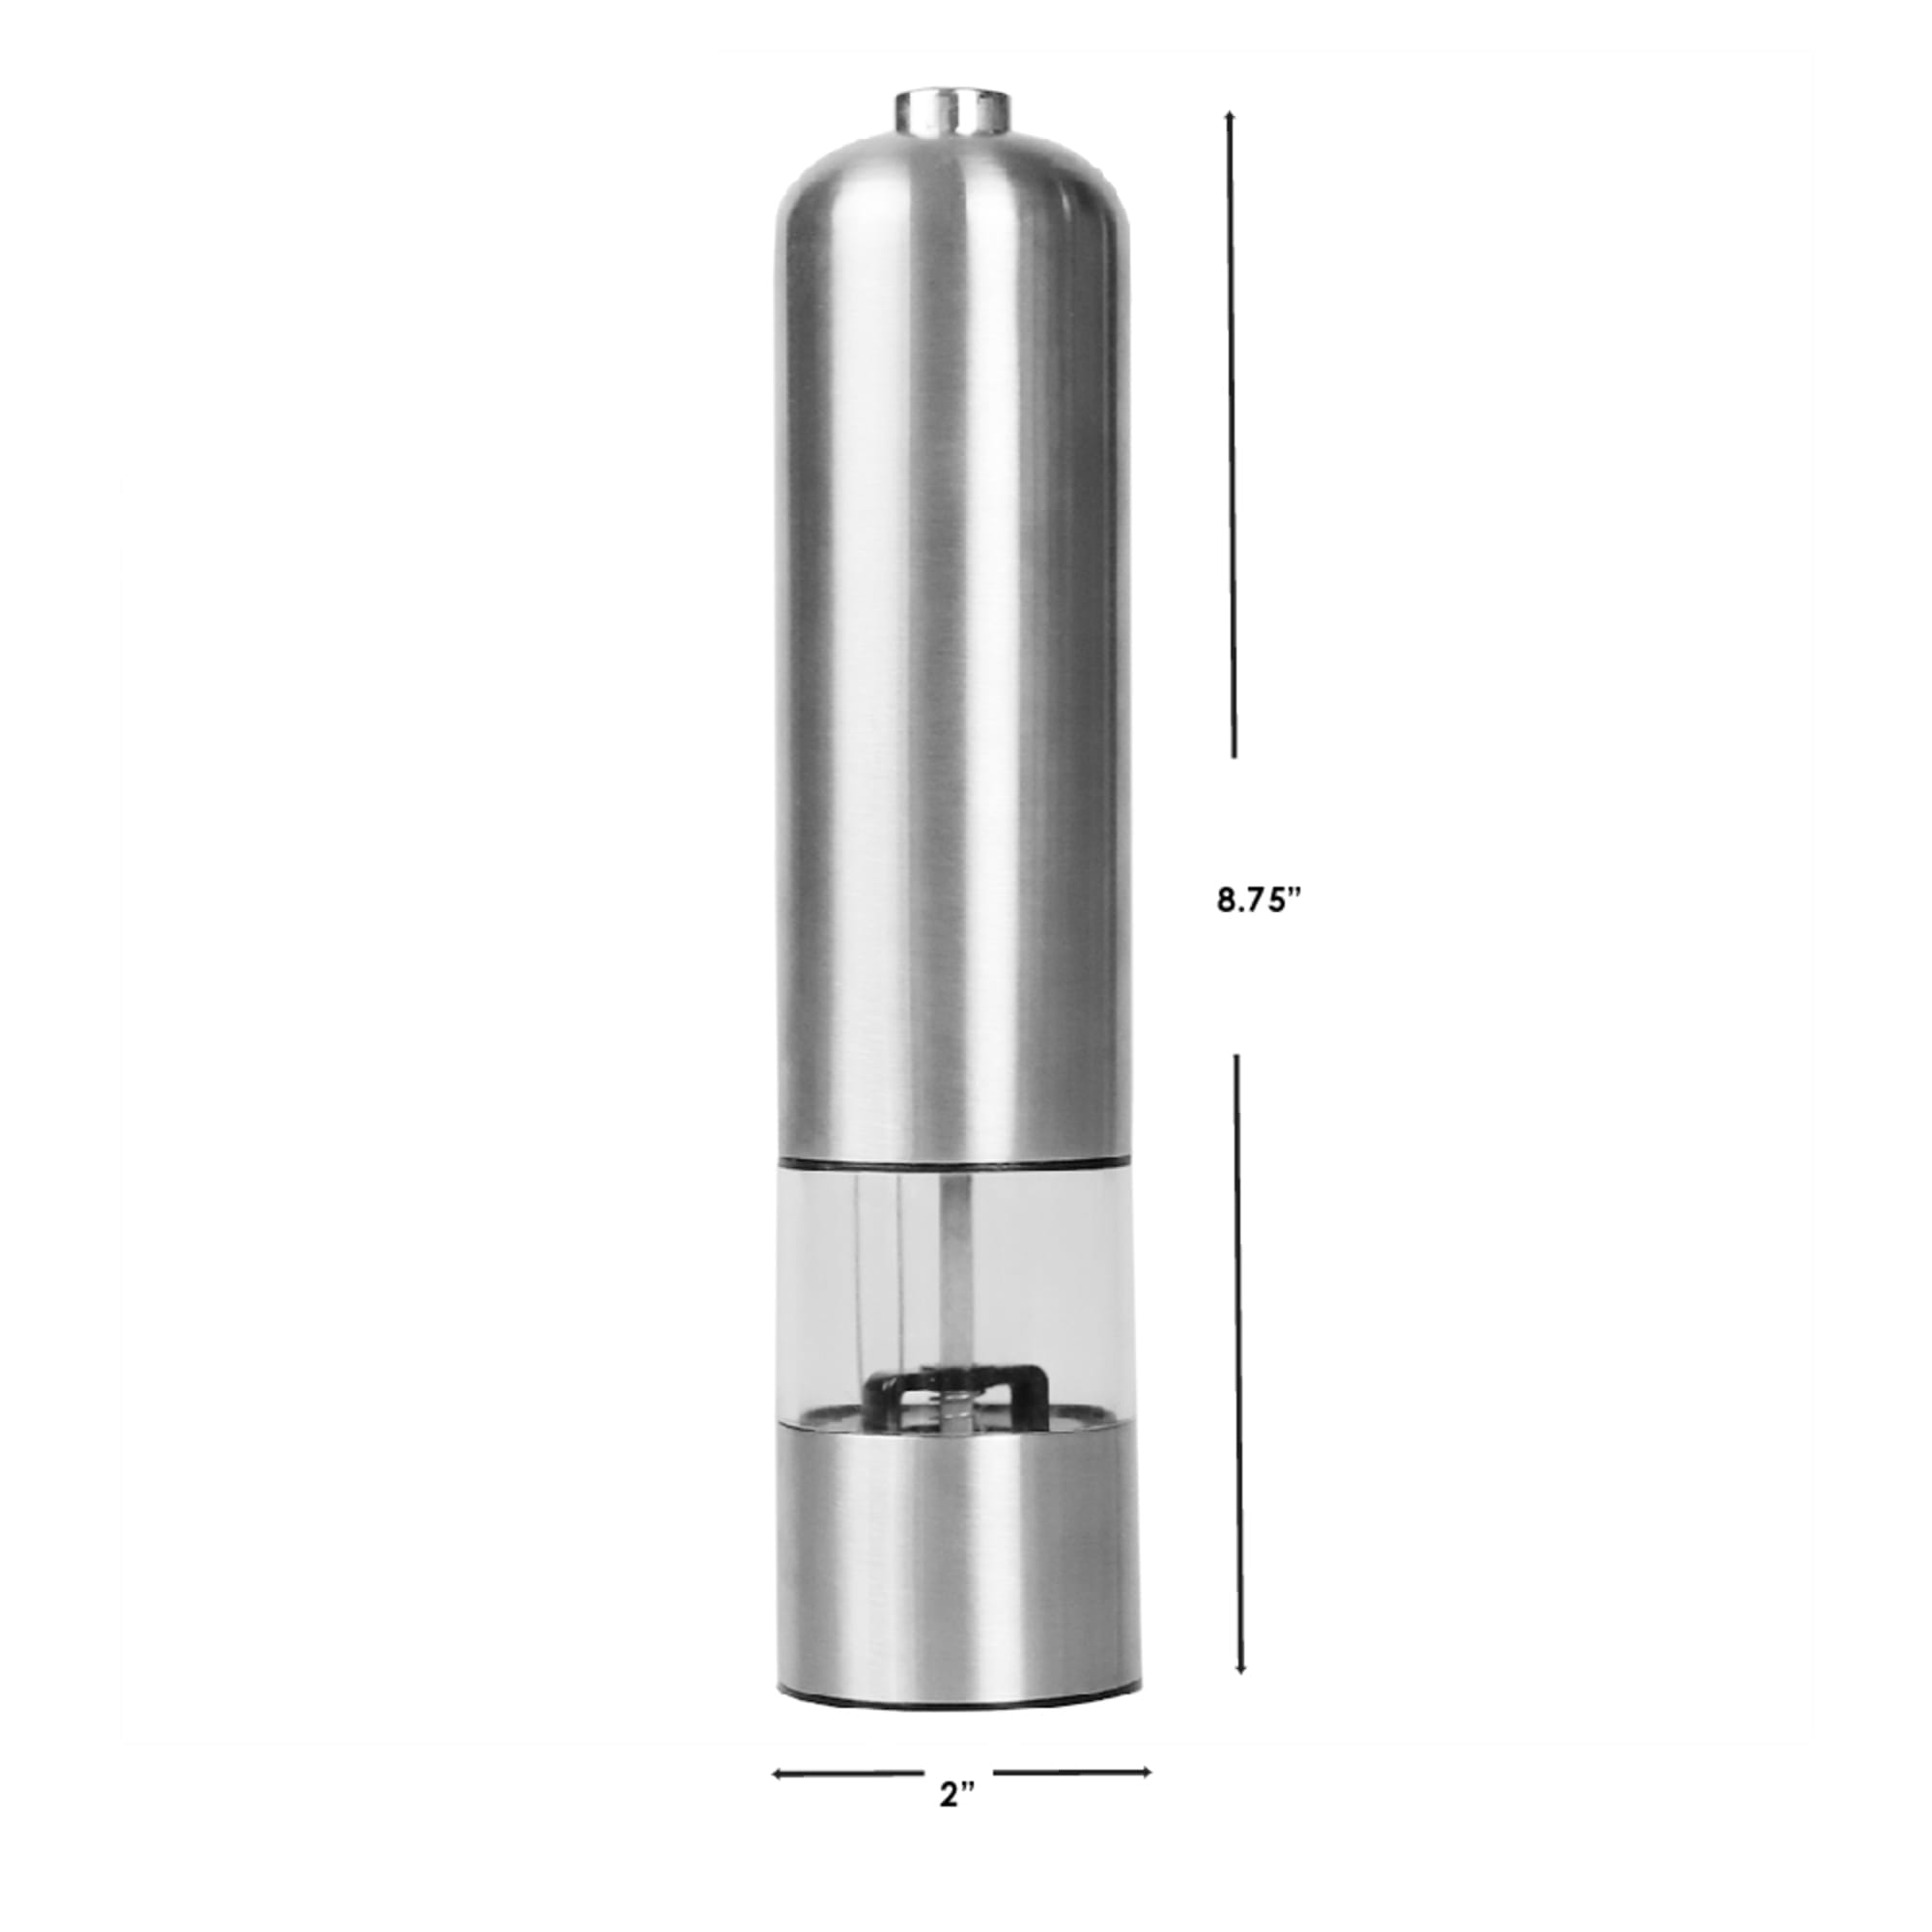 Michael Graves Design Automatic Pepper Grinder, Silver $8.00 EACH, CASE PACK OF 12